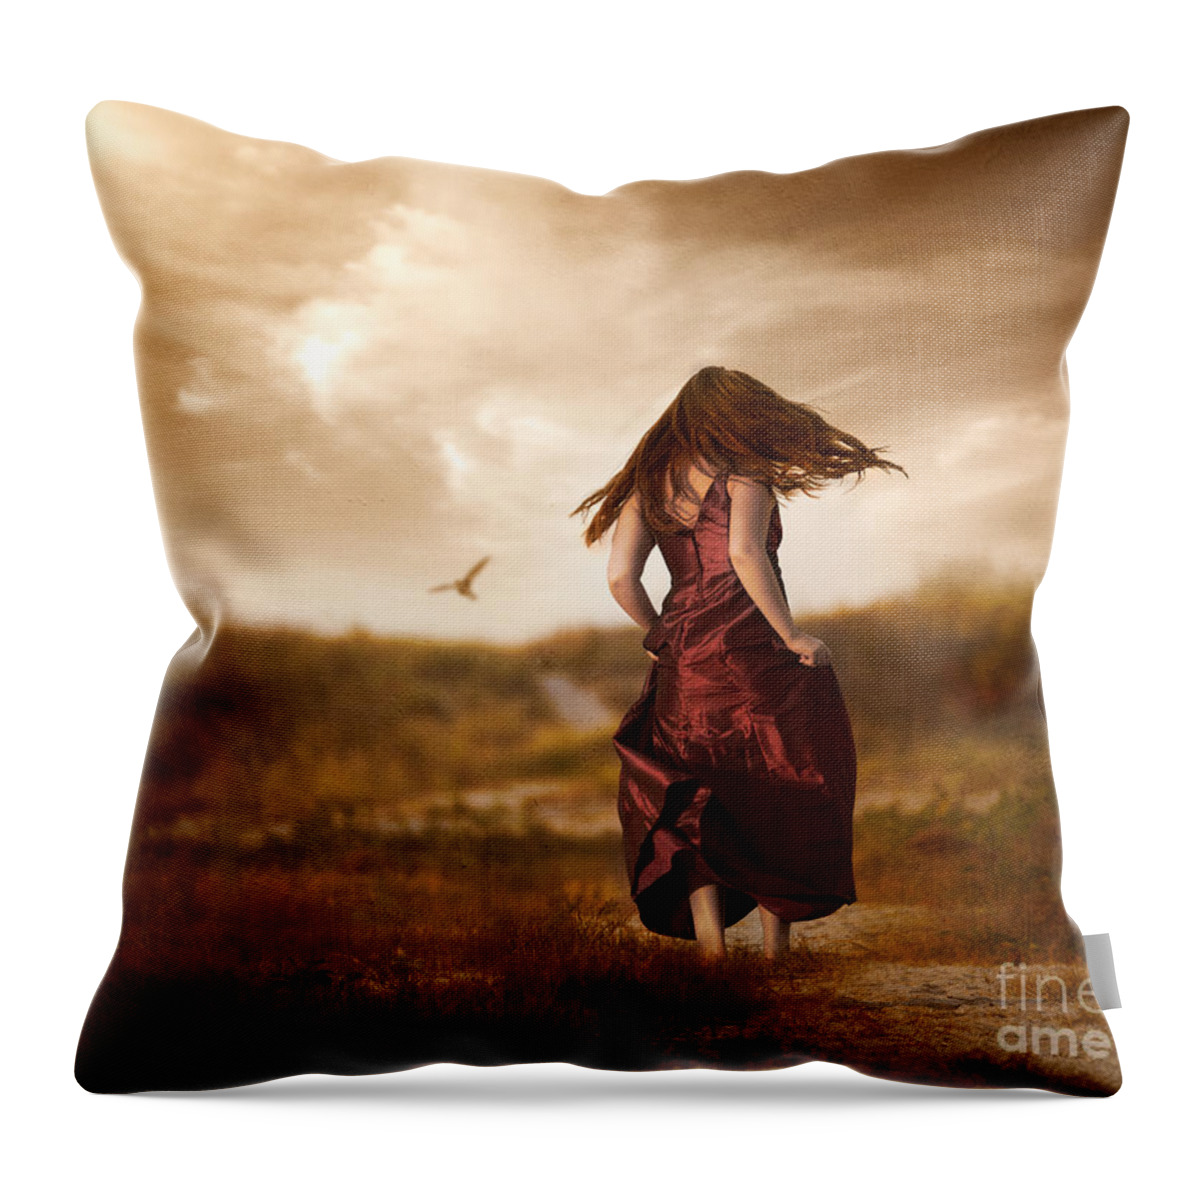 Digital Art Throw Pillow featuring the photograph Chasing Peace by Alissa Beth Photography